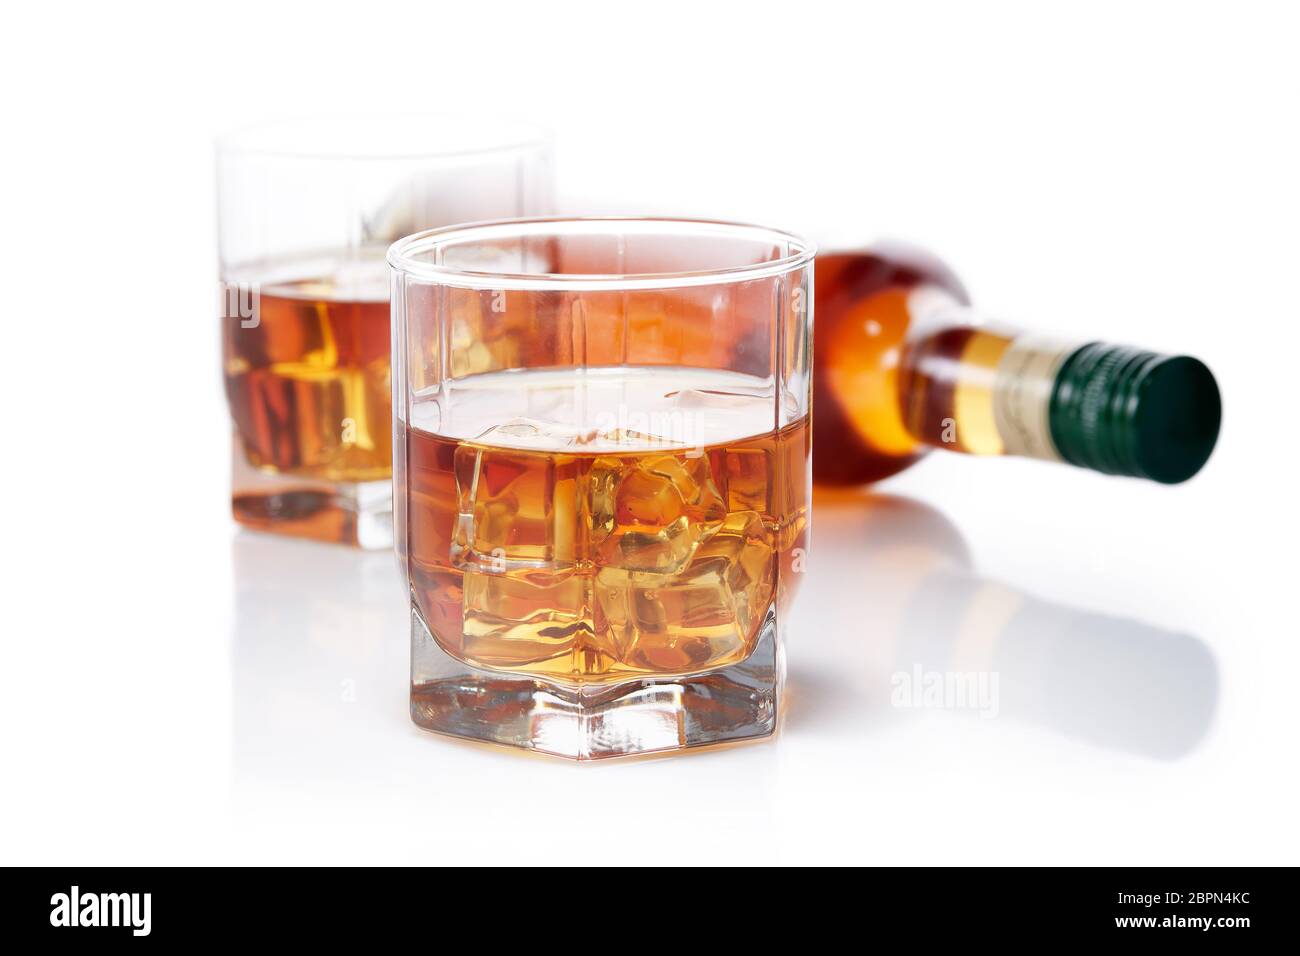 Bottle of whisky and two glasses of whisky with ices on a white background with reflection Stock Photo